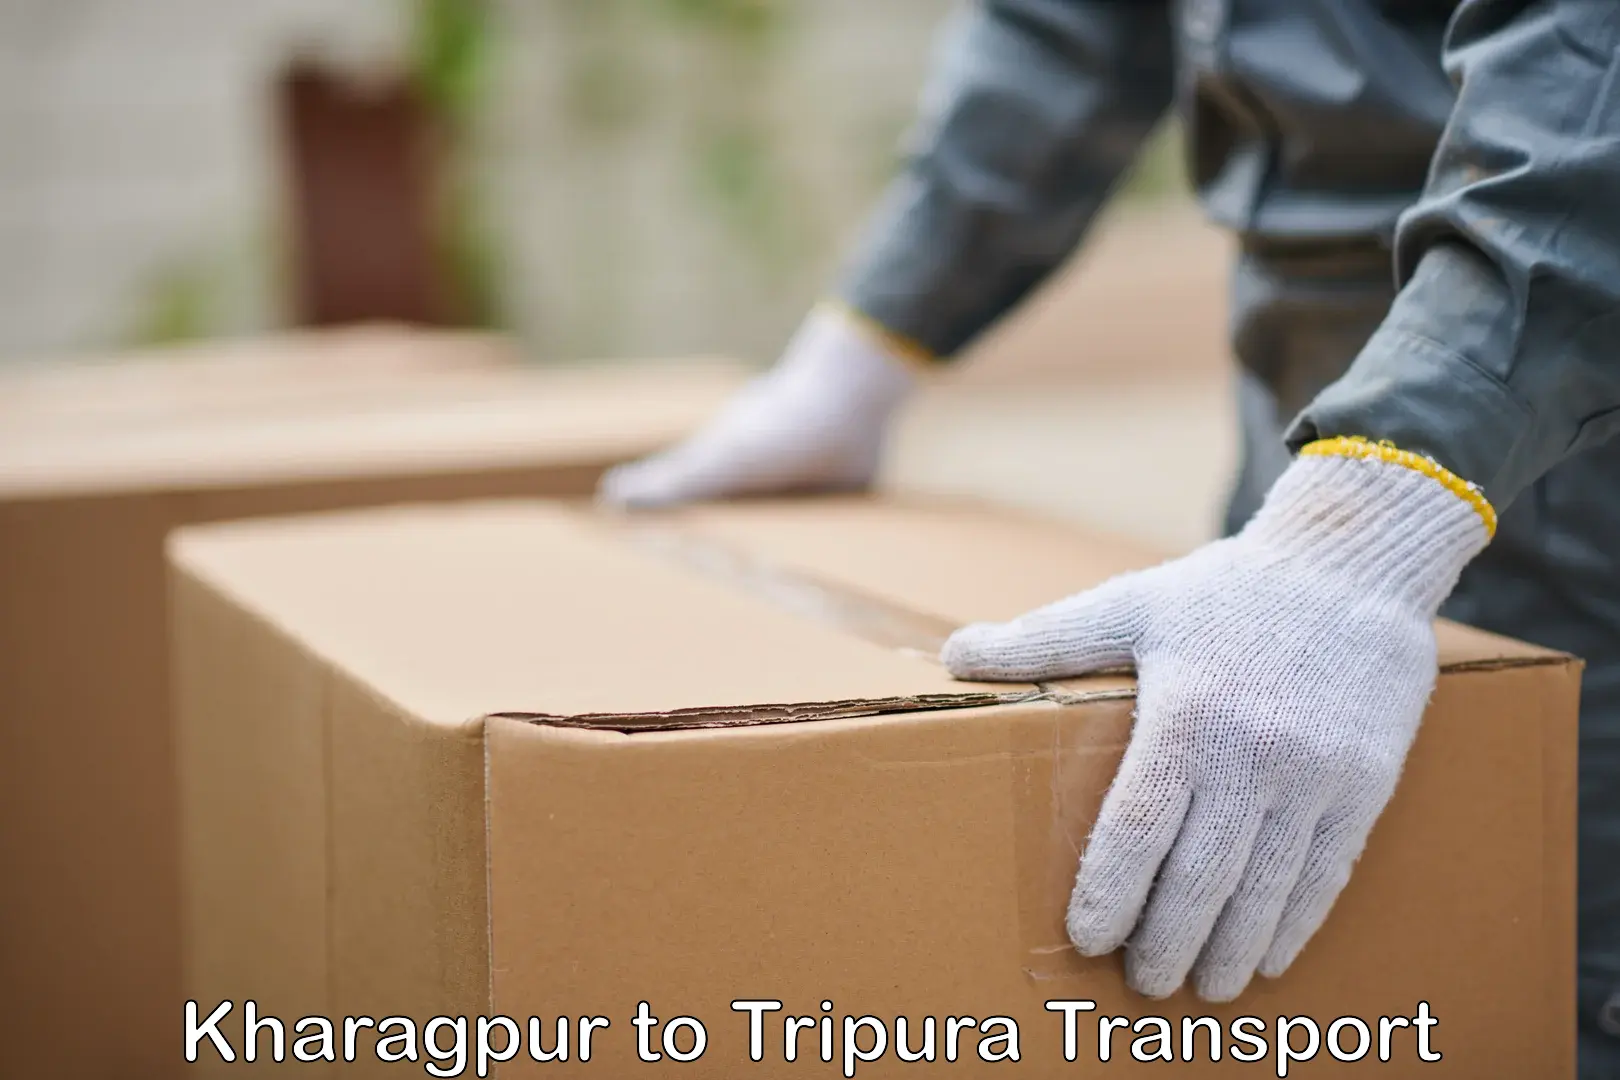 Daily parcel service transport in Kharagpur to IIIT Agartala